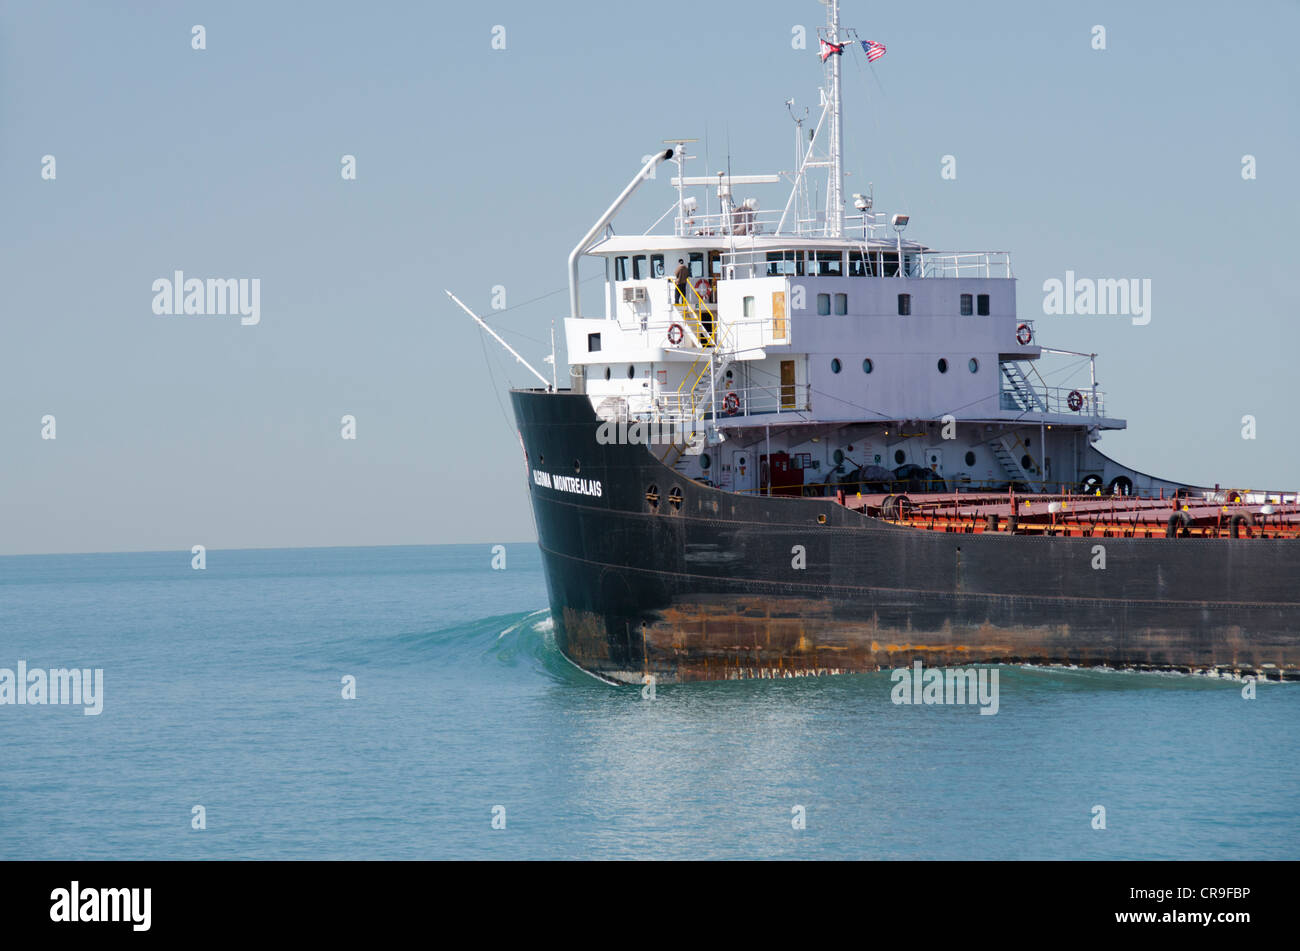 Michigan, Lake Erie, Detroit River near Wyandotte. Typical 'Laker' style cargo ship that sails in the Great Lakes. Stock Photo